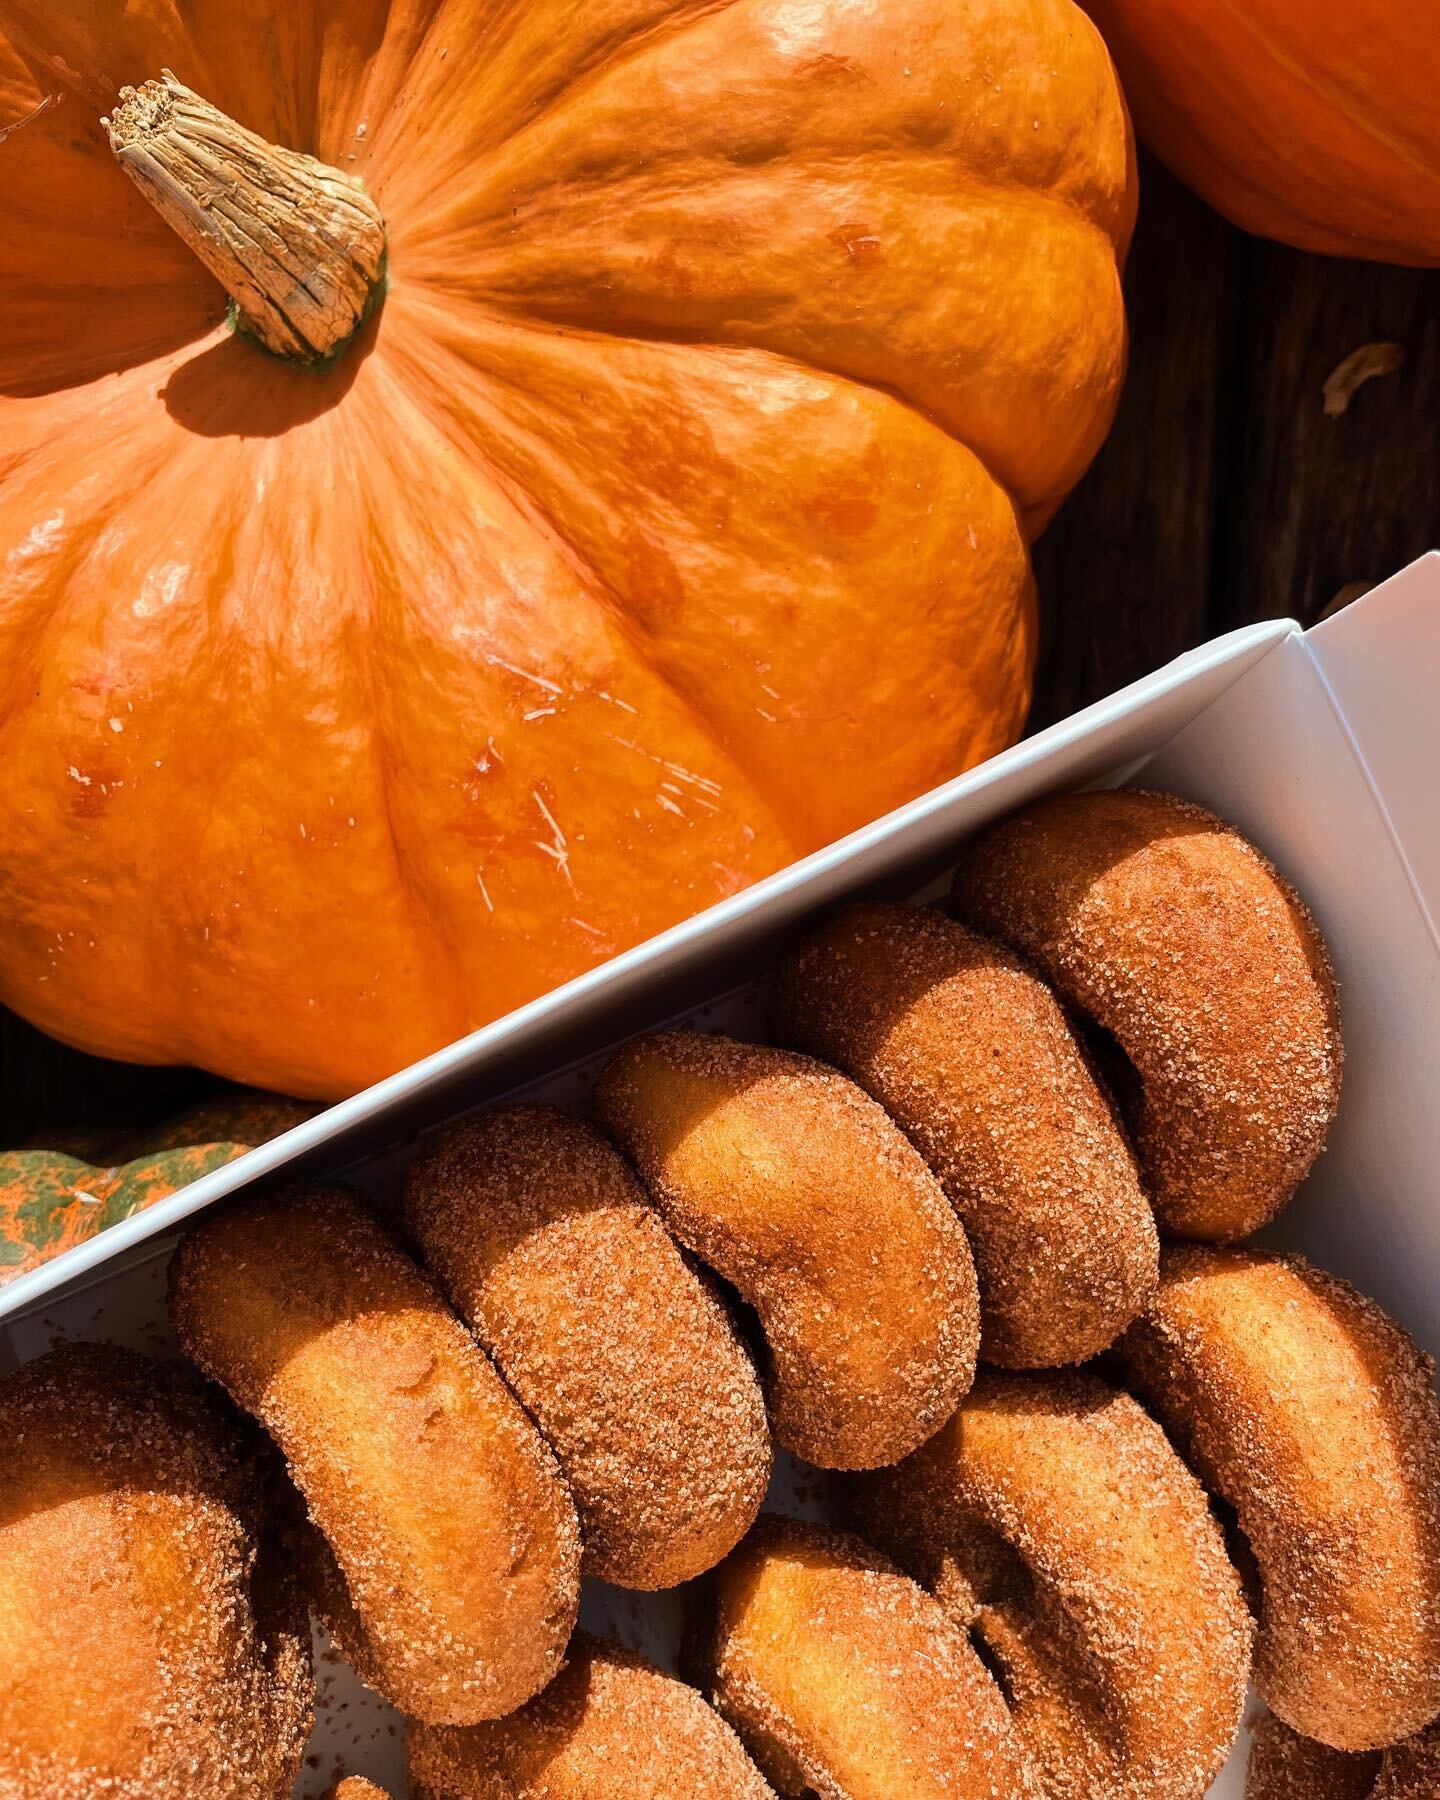 the basic apple picking content you didn&rsquo;t want, but make it about the apple cider donuts you actually *need*
🍎
grateful for this tradition going six years strong + the people who make it one of the coziest days of the year. if you haven&rsquo